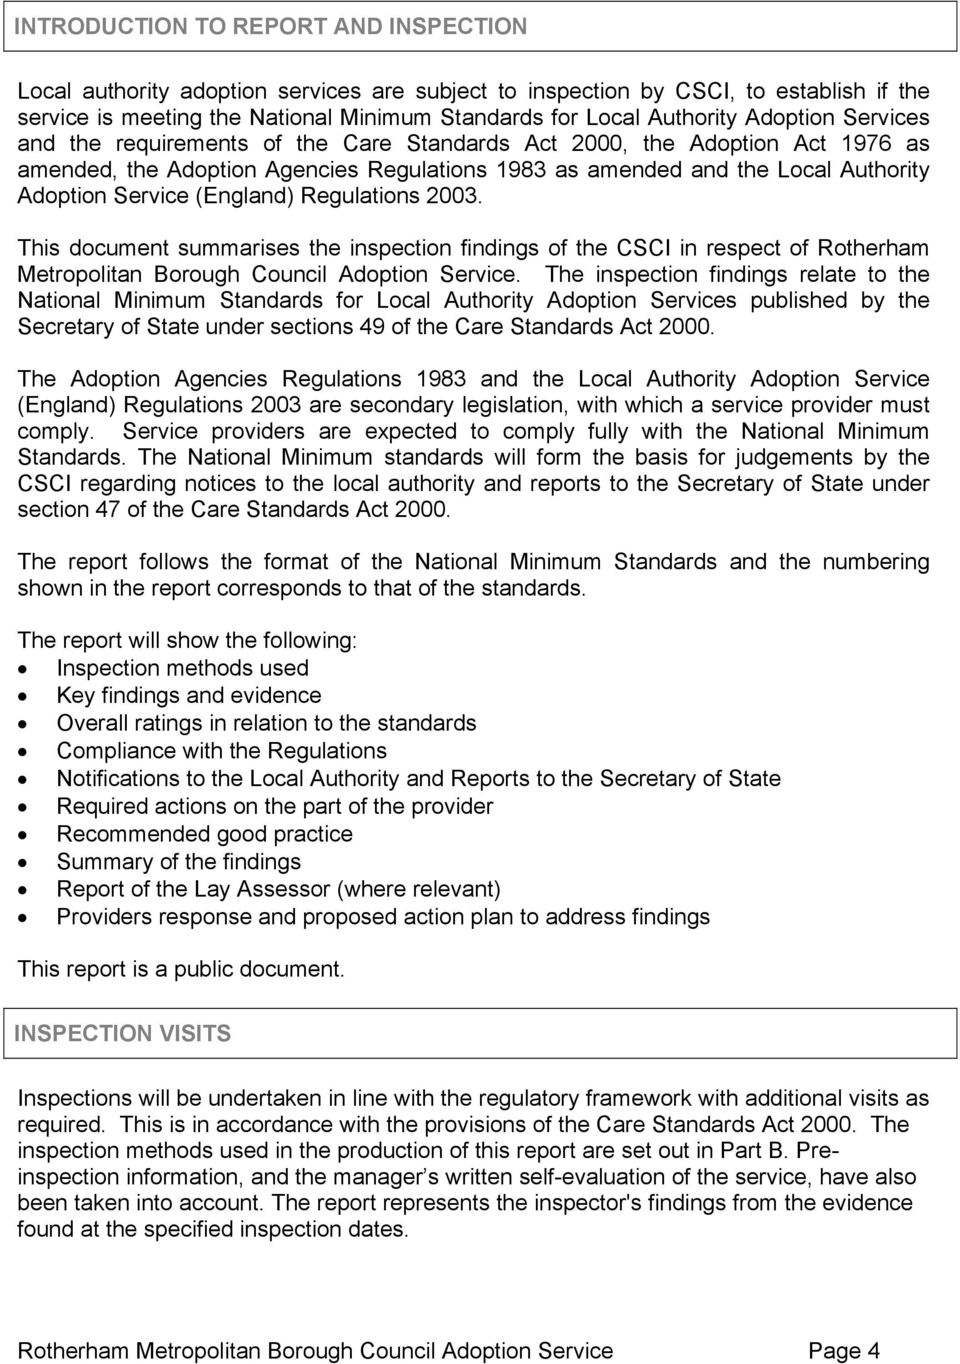 (England) Regulations 2003. This document summarises the inspection findings of the CSCI in respect of Rotherham Metropolitan Borough Council Adoption Service.